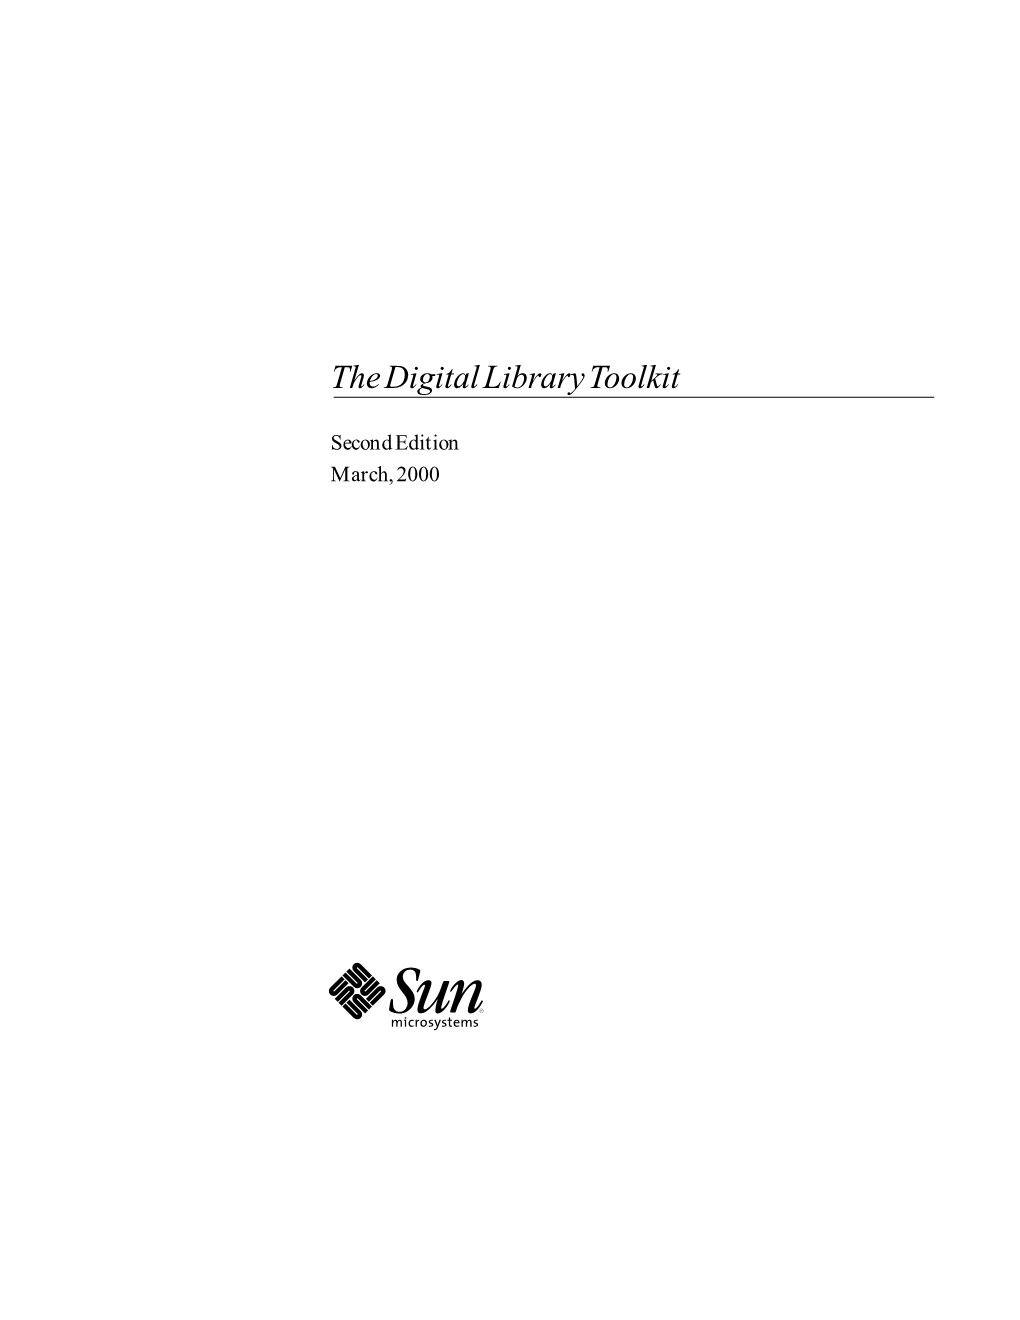 The Digital Library Toolkit